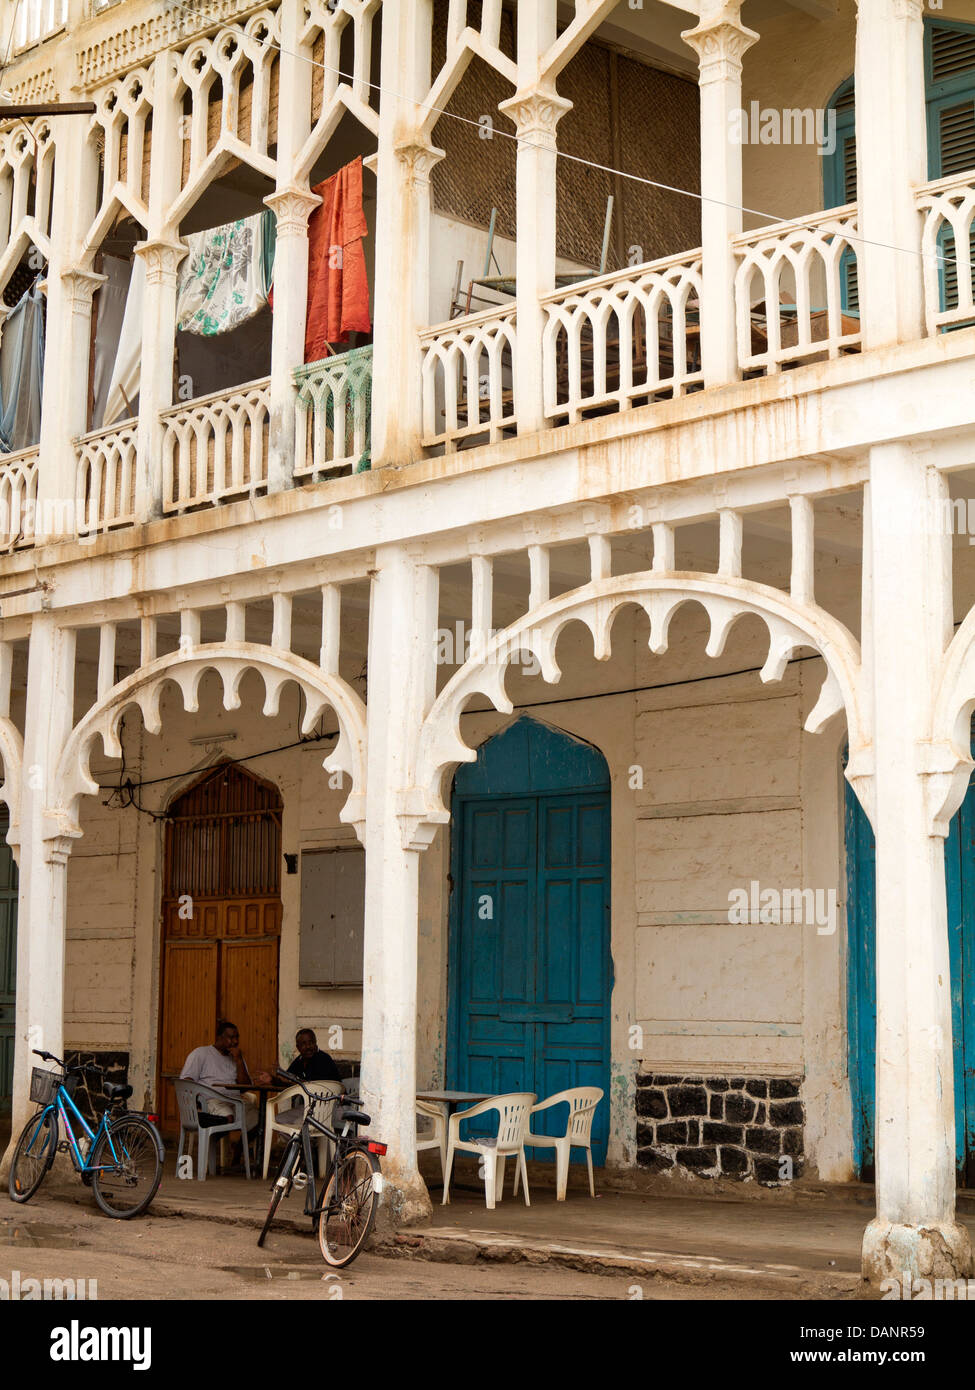 Africa, Eritrea, Massawa, Old Town, Ottoman architecture building, shady ornate collonade and balconies Stock Photo